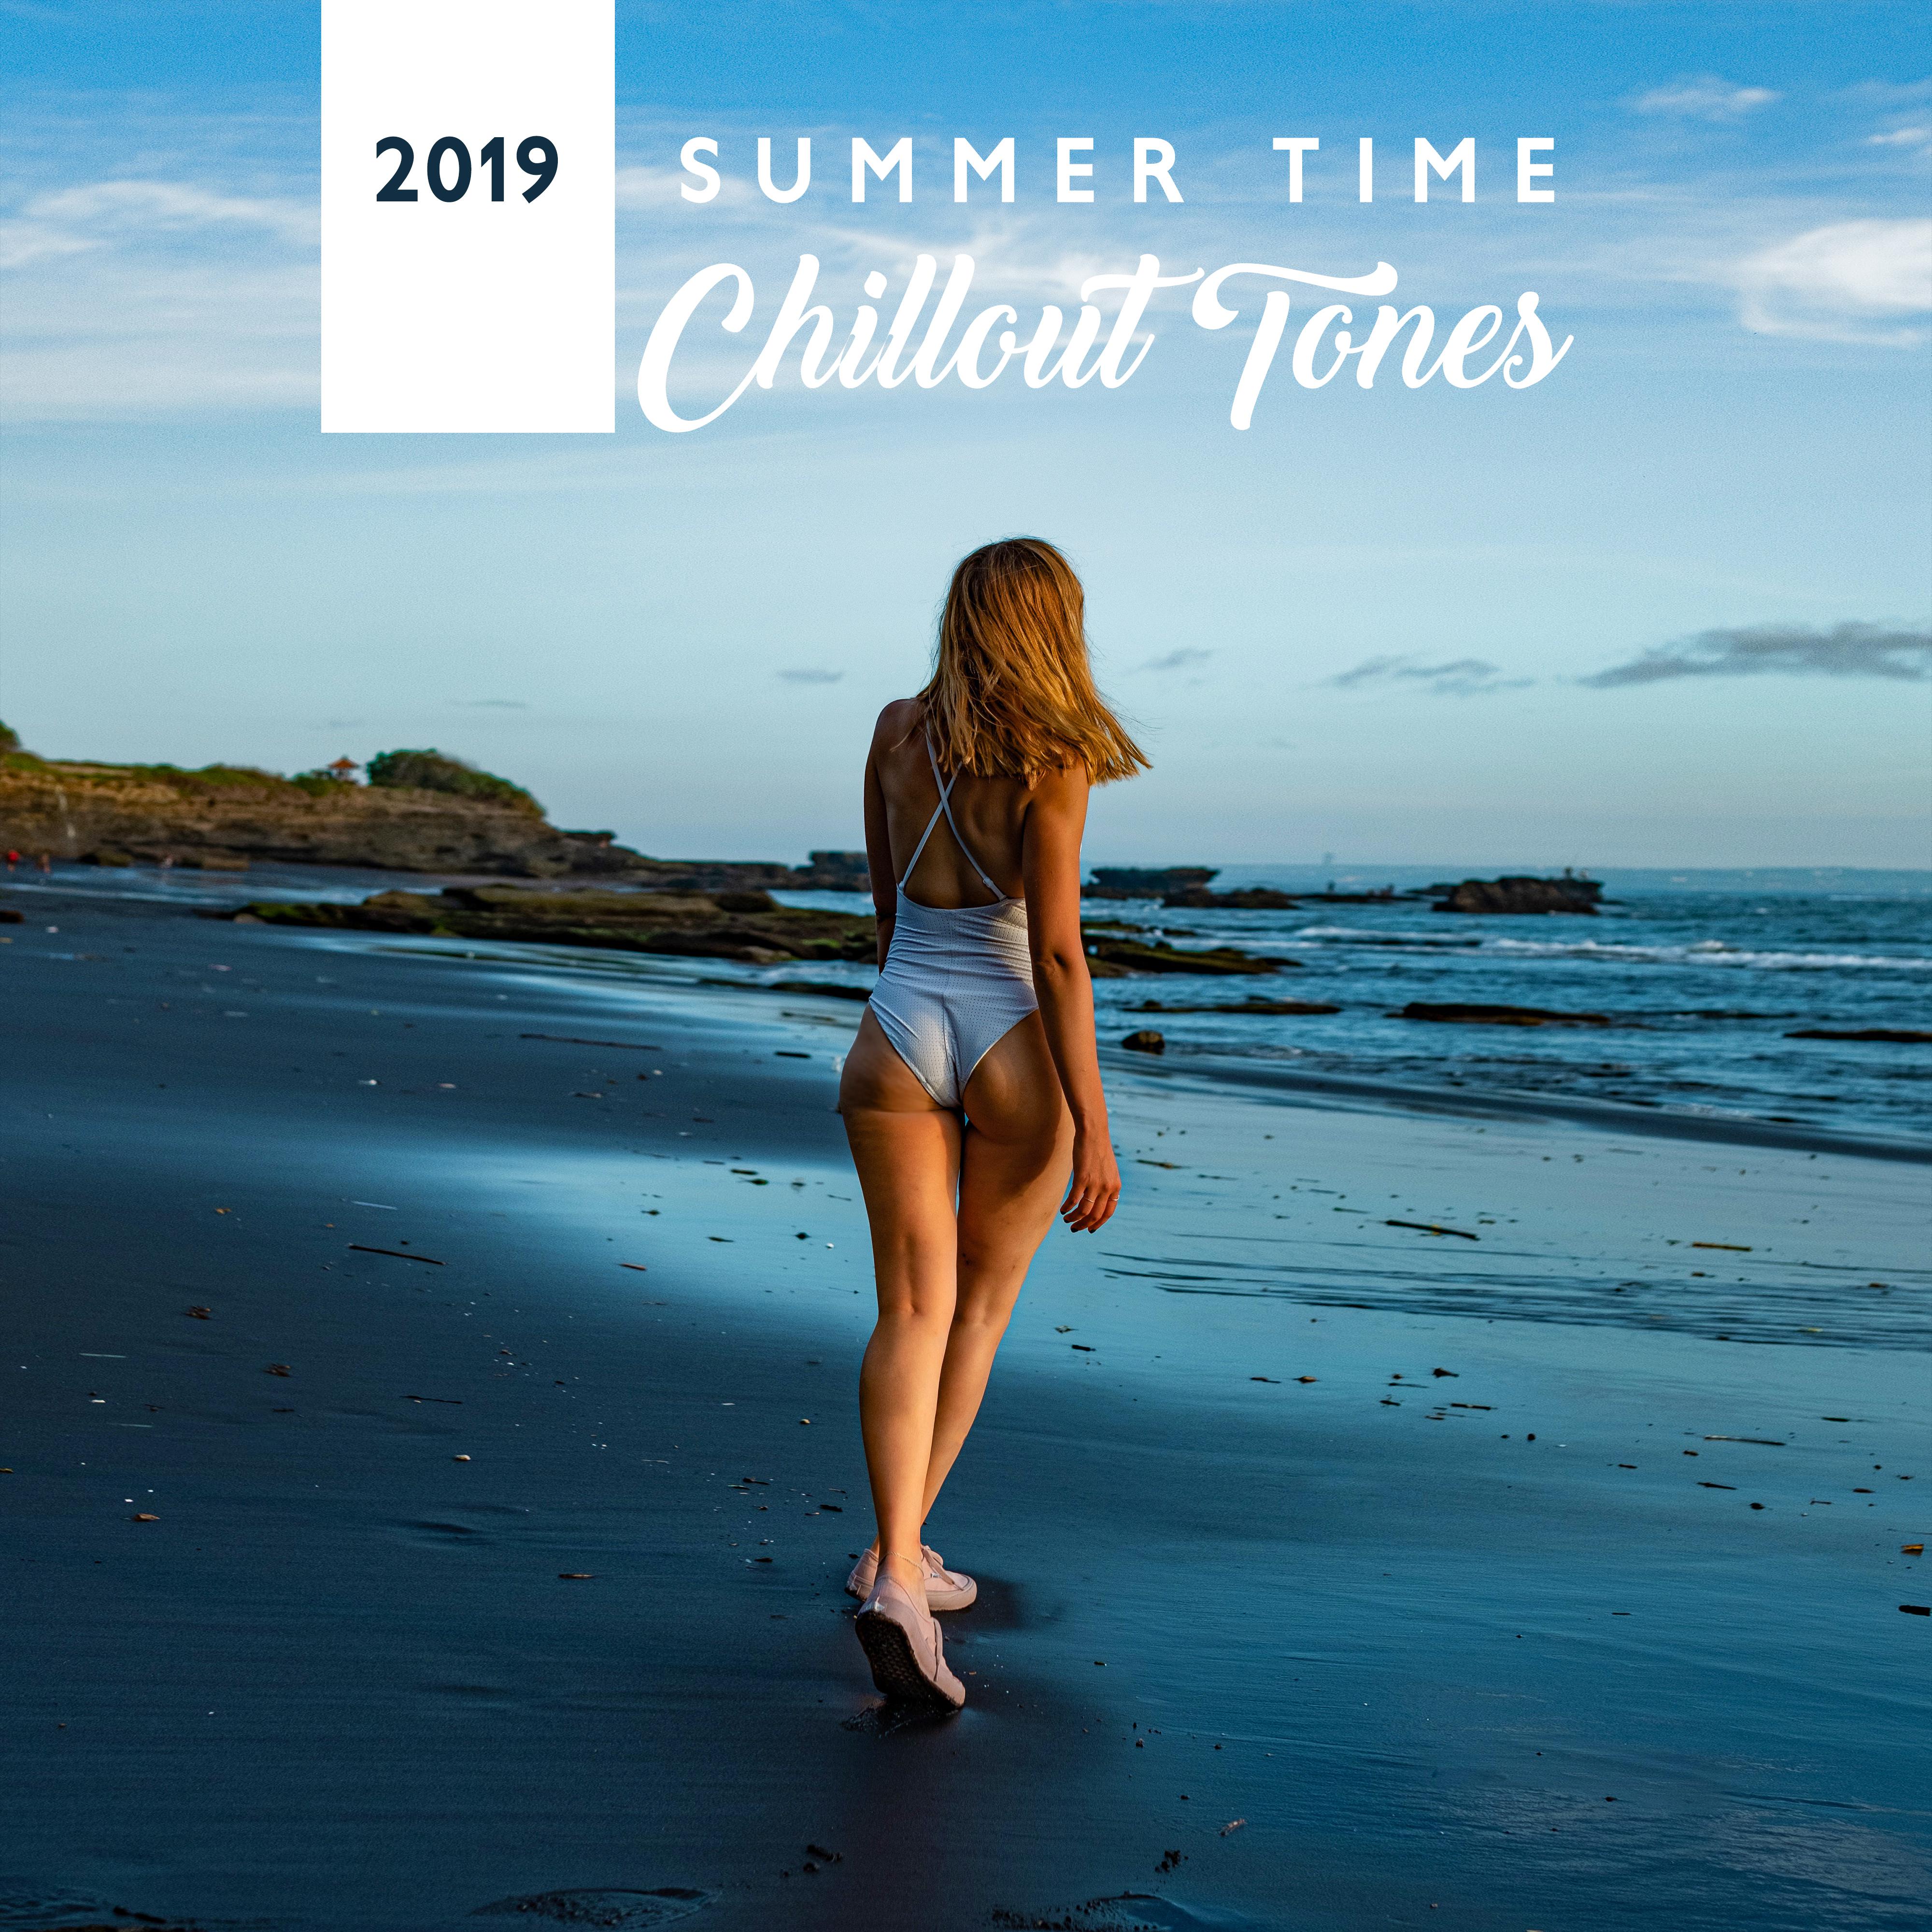 2019 Summer Time Chillout Tones: Music Compilation for Celebrating Summer, Sunny Vacation Vibes, Tropical Beach Party Rhythms